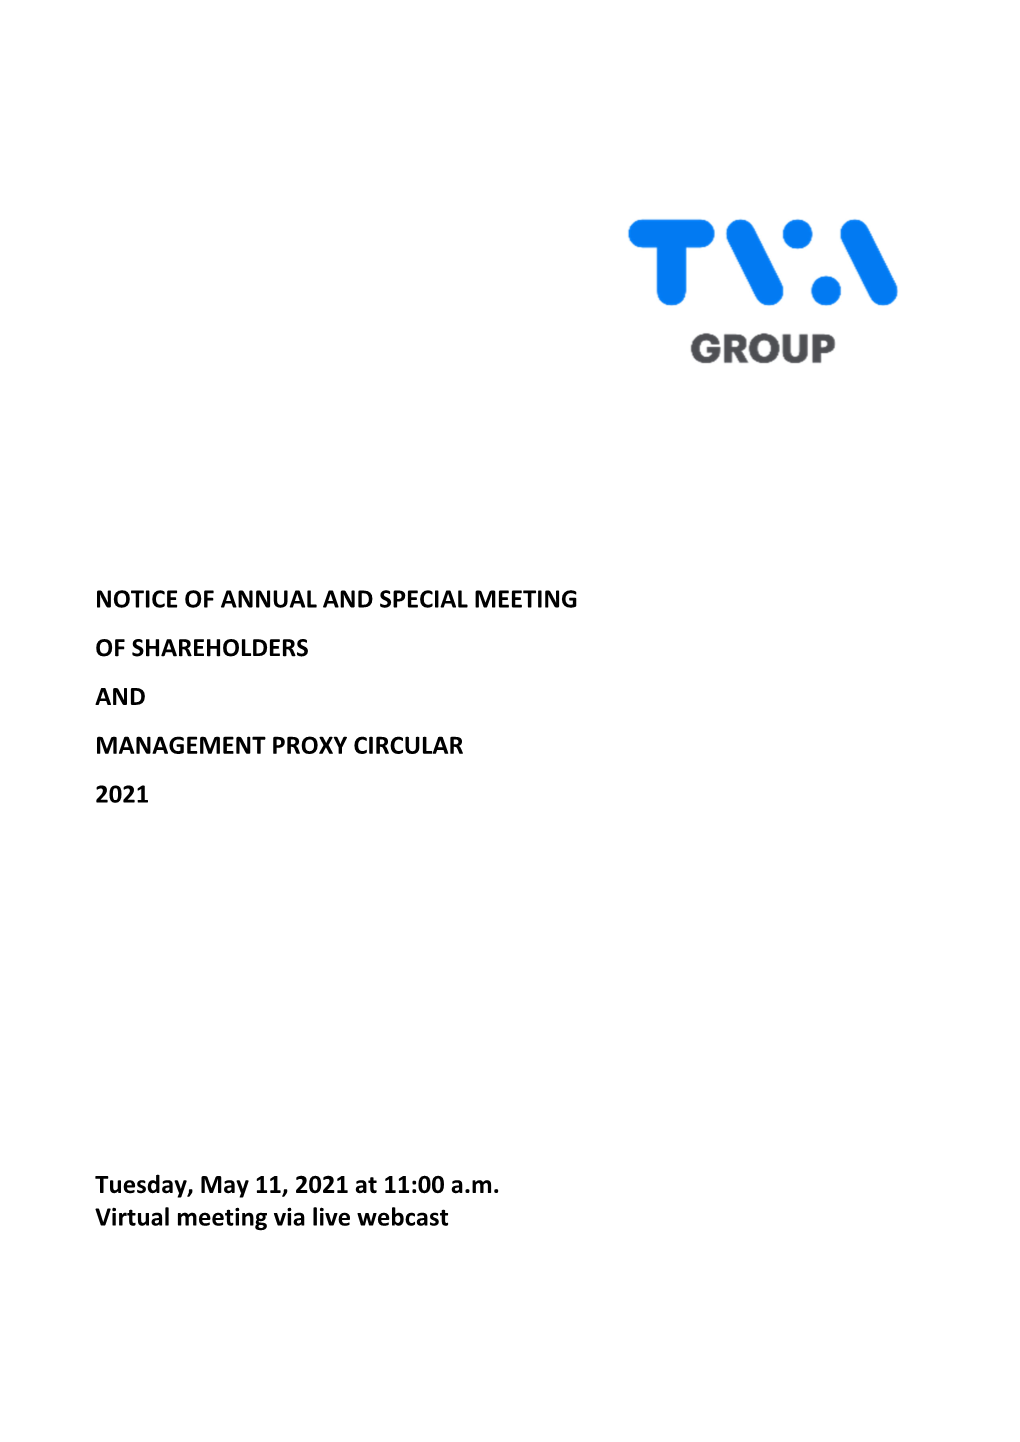 Notice of Annual and Special Meeting of Shareholders and Management Proxy Circular 2021